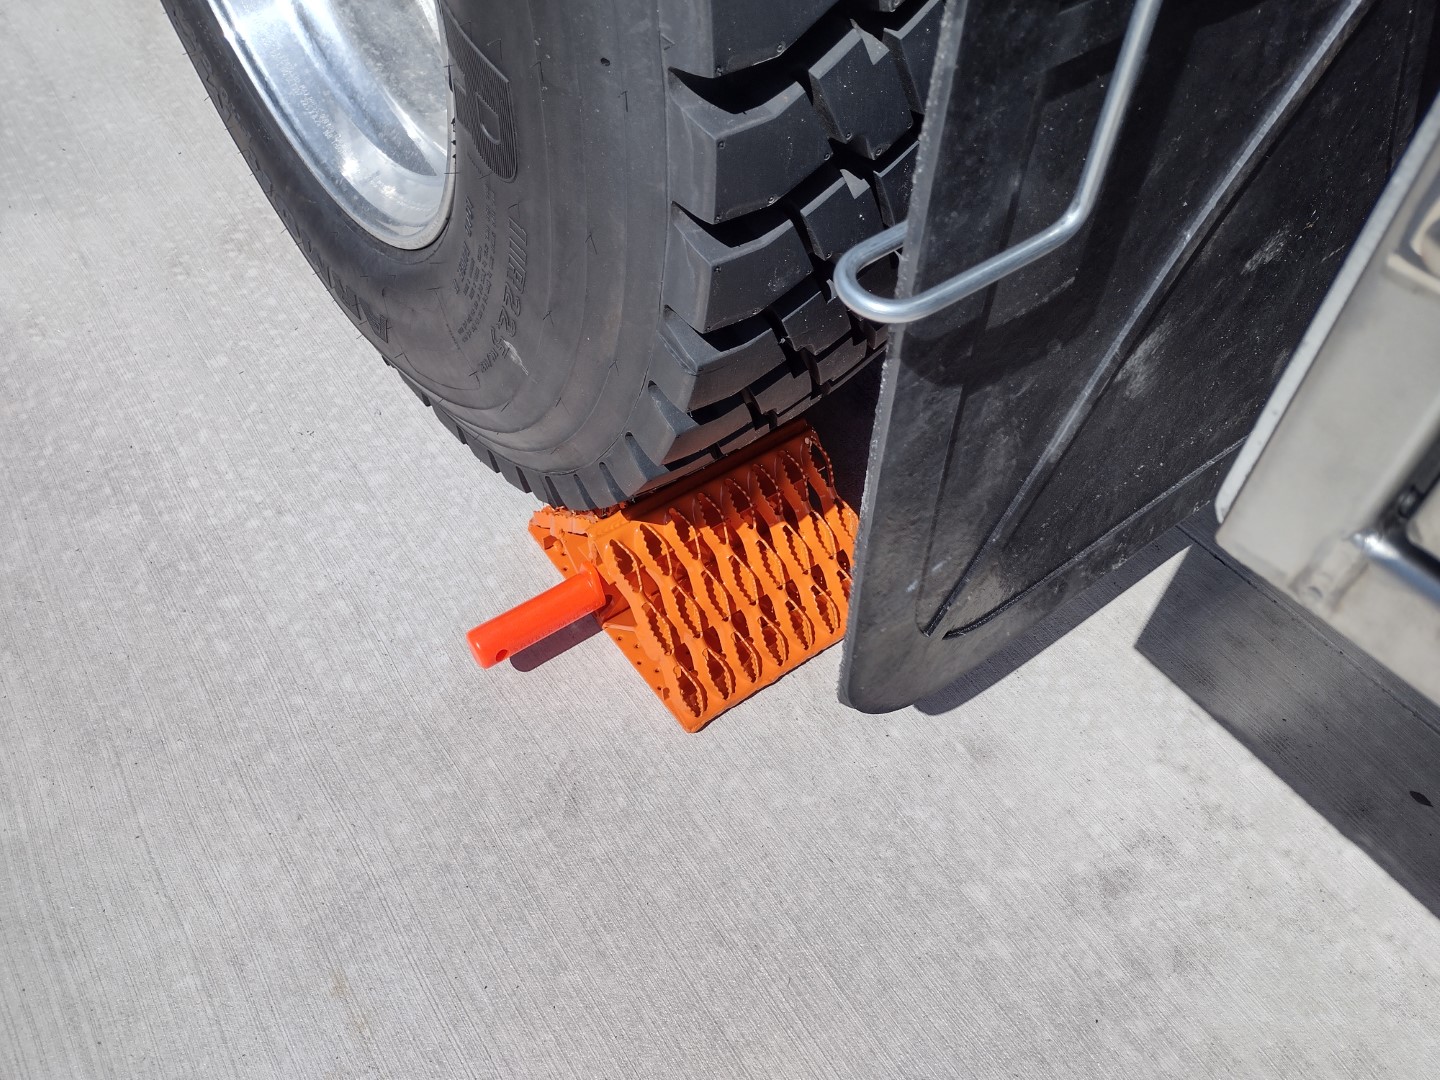 One All-Weather Wheel Chock with steel grip strut surfaces in position on the ground against a tire. The wheel, mudflap and the wheel chock are visible. The All-Weather Wheel Chock has powder coat orange over galvanized finish and includes an orange urethane grip handle.